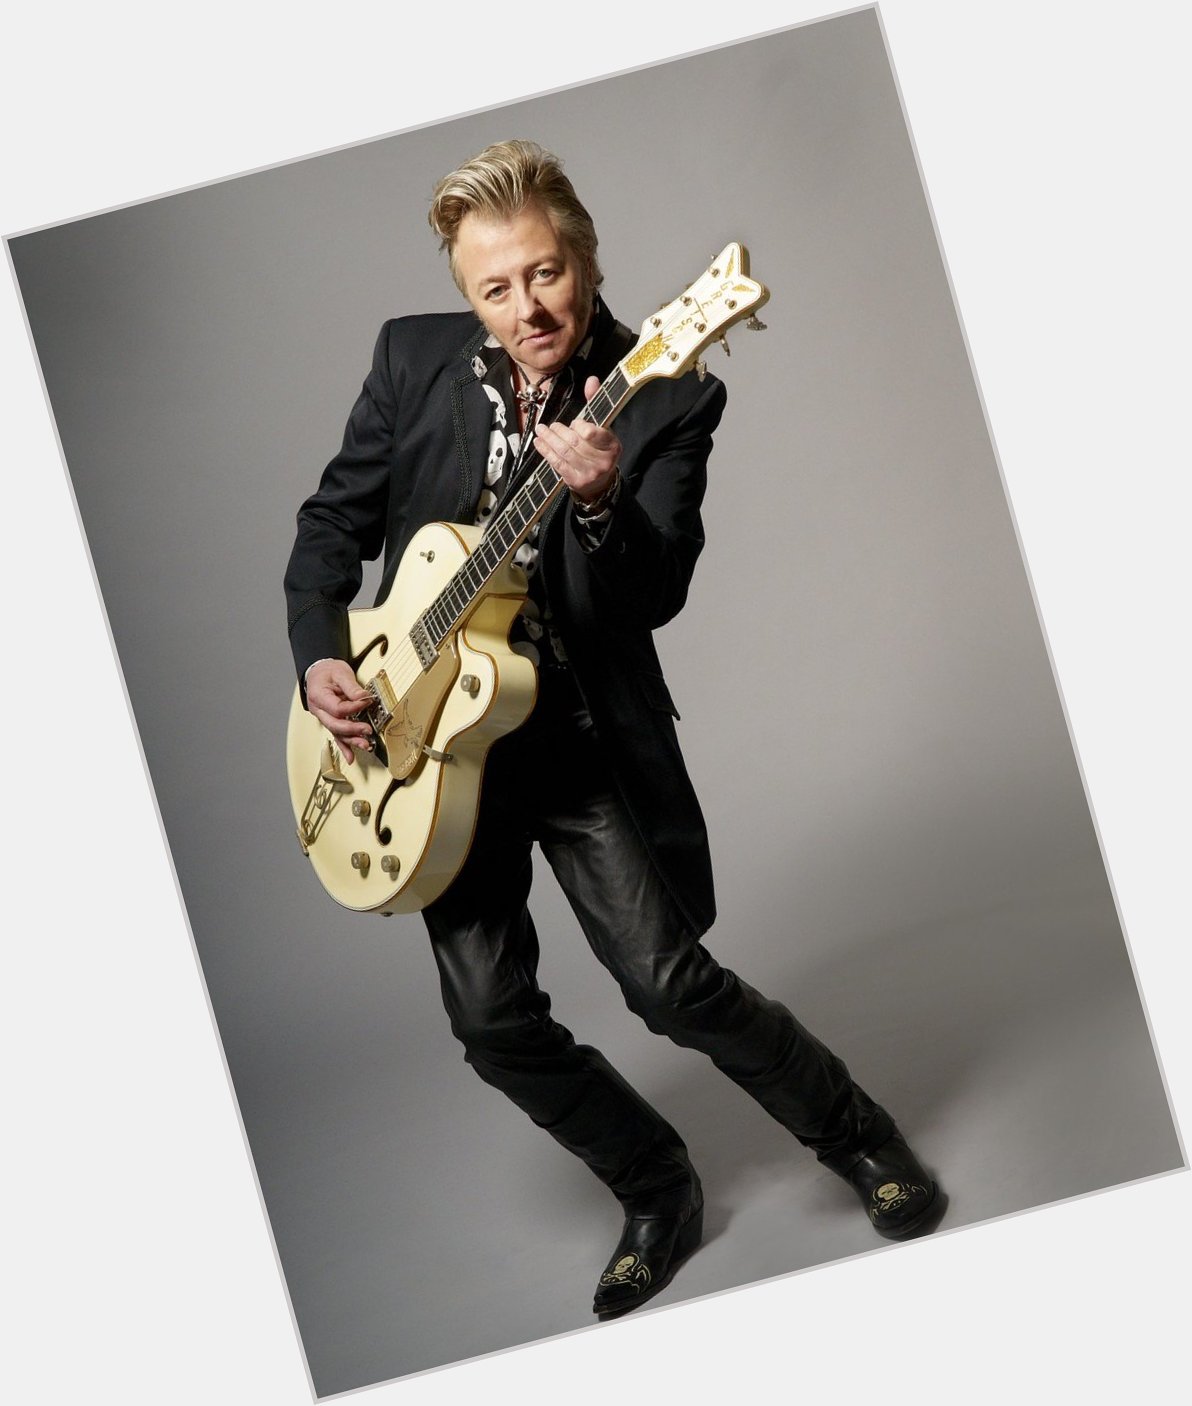 Happy 63rd birthday to Brian Setzer! What a talent! 